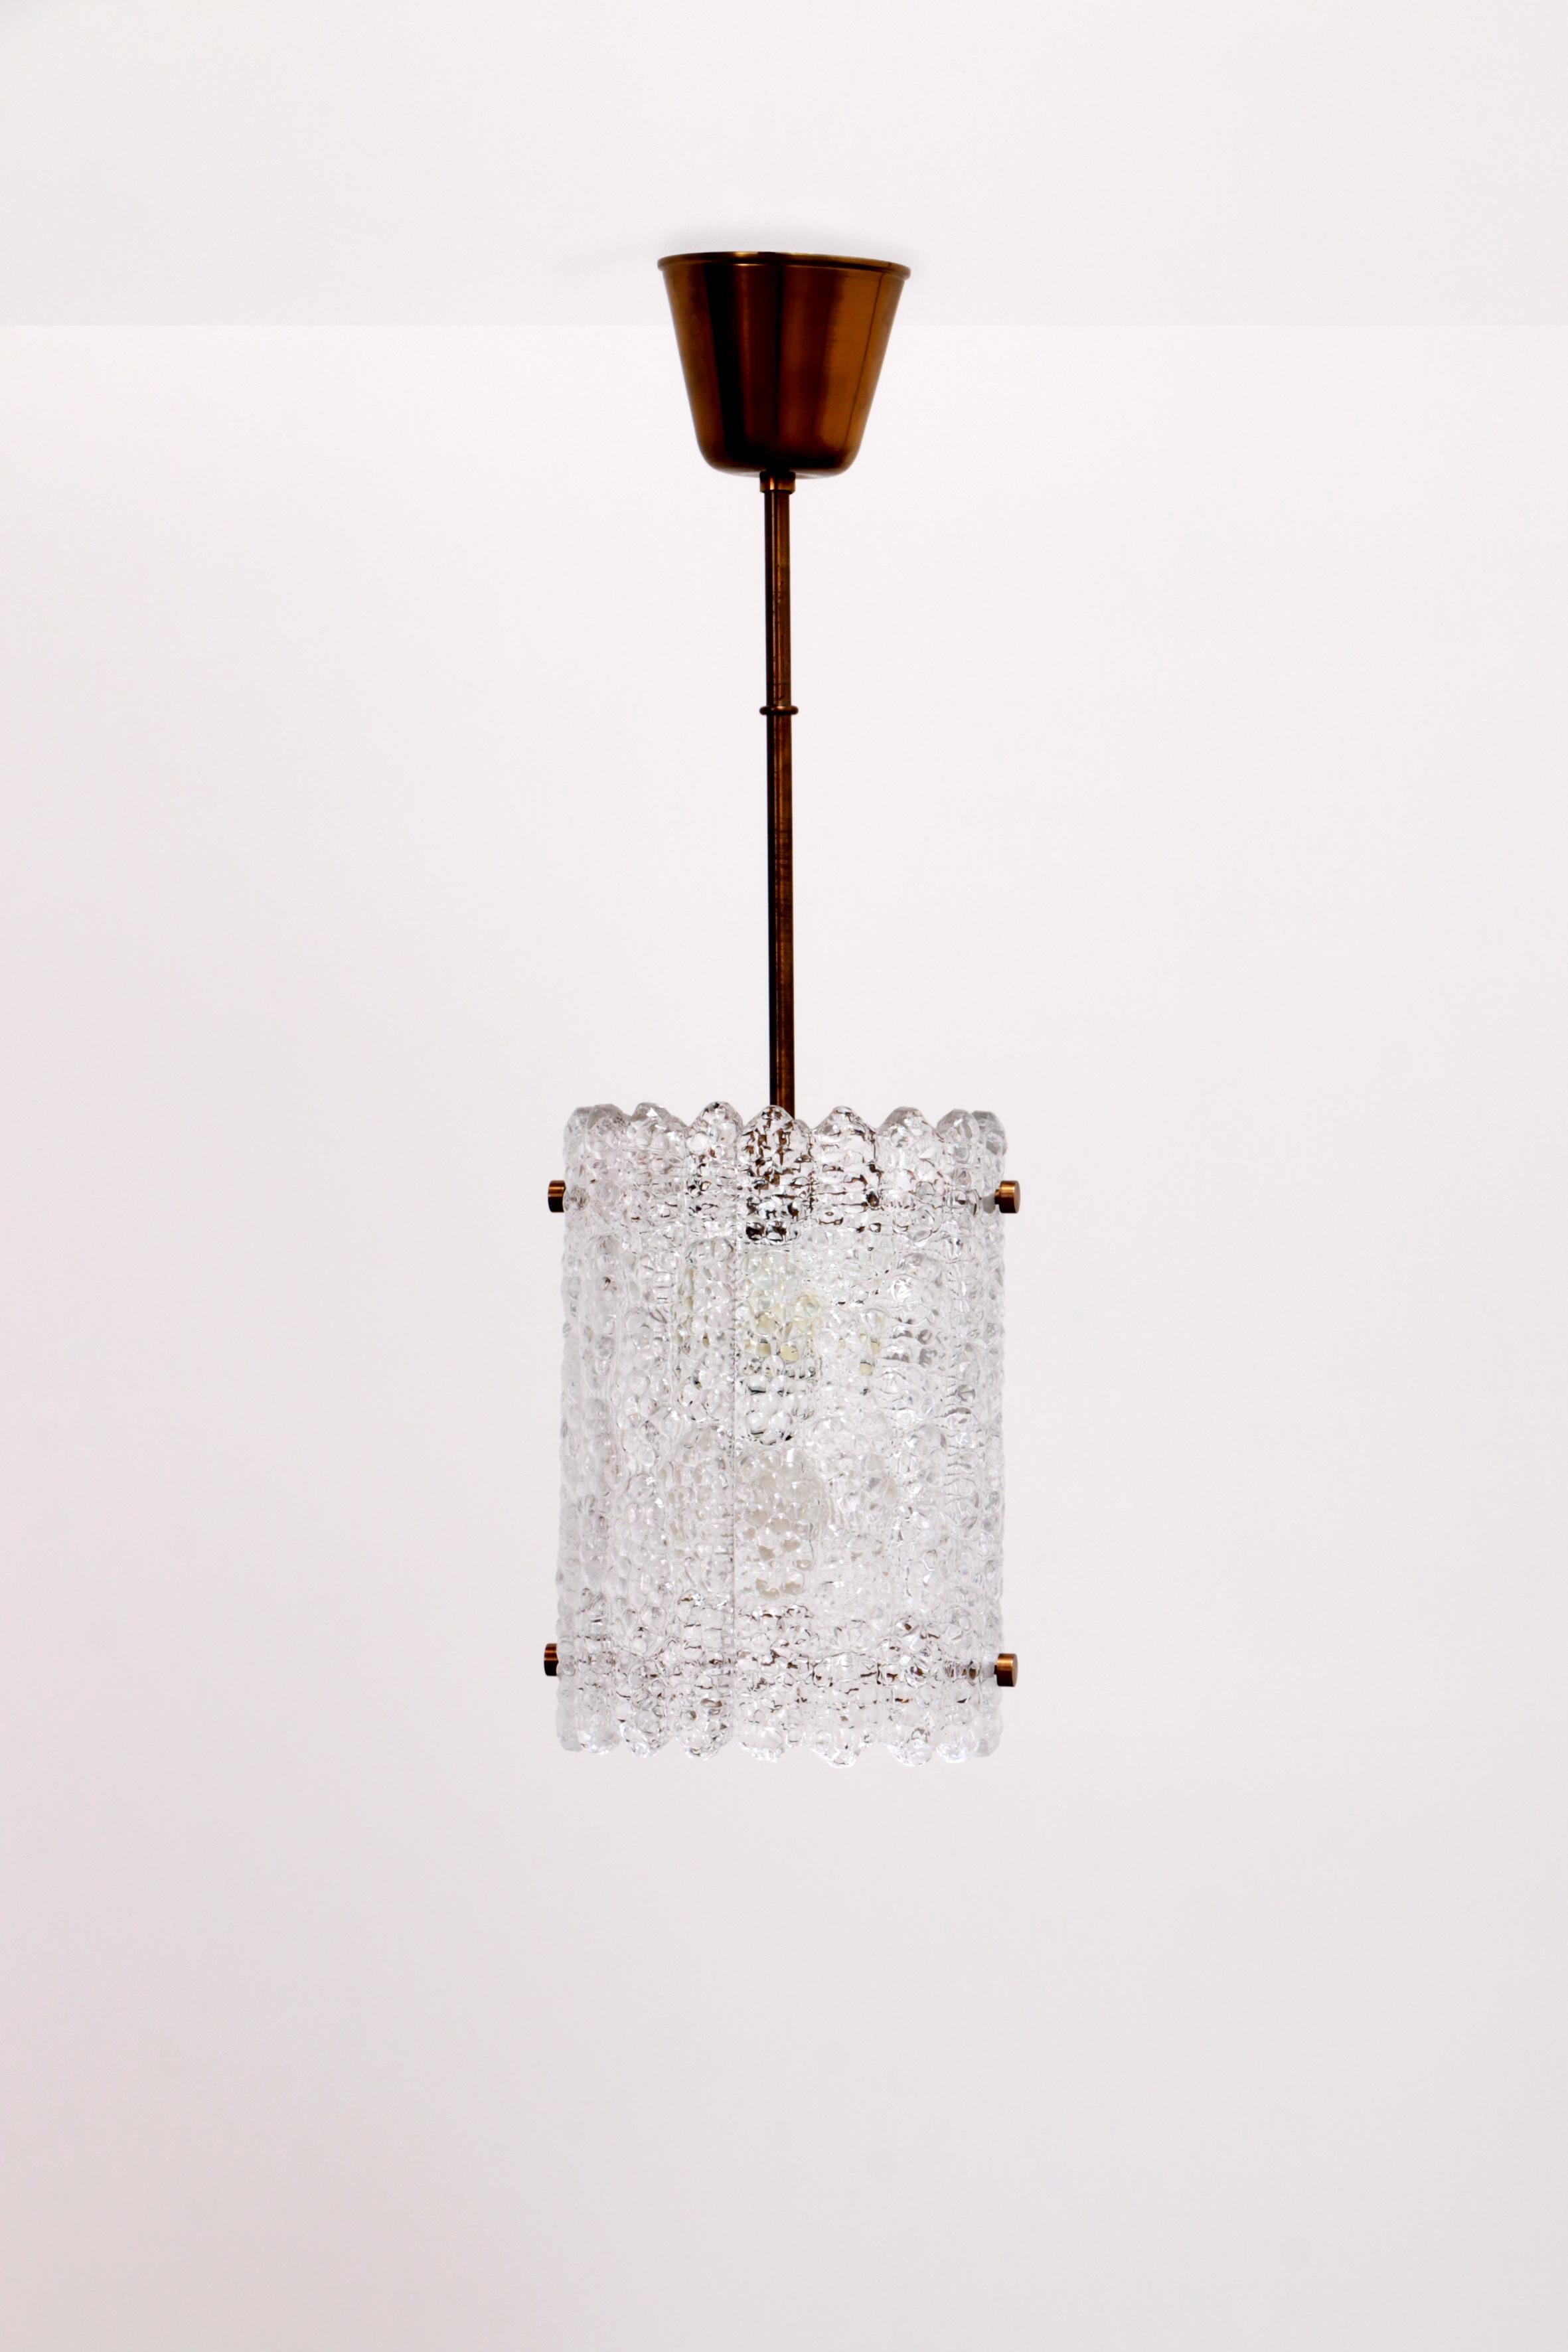 Brass and glass hanging lamp by Carl Fagerlund for Orrefors, Sweden

Ceiling lamp designed by Carl Fagerlund, manufactured by Orrefors in Sweden in the 1960s.

Brass structure with glass diffuser.

This is a beautiful solid glass hanging lamp with a